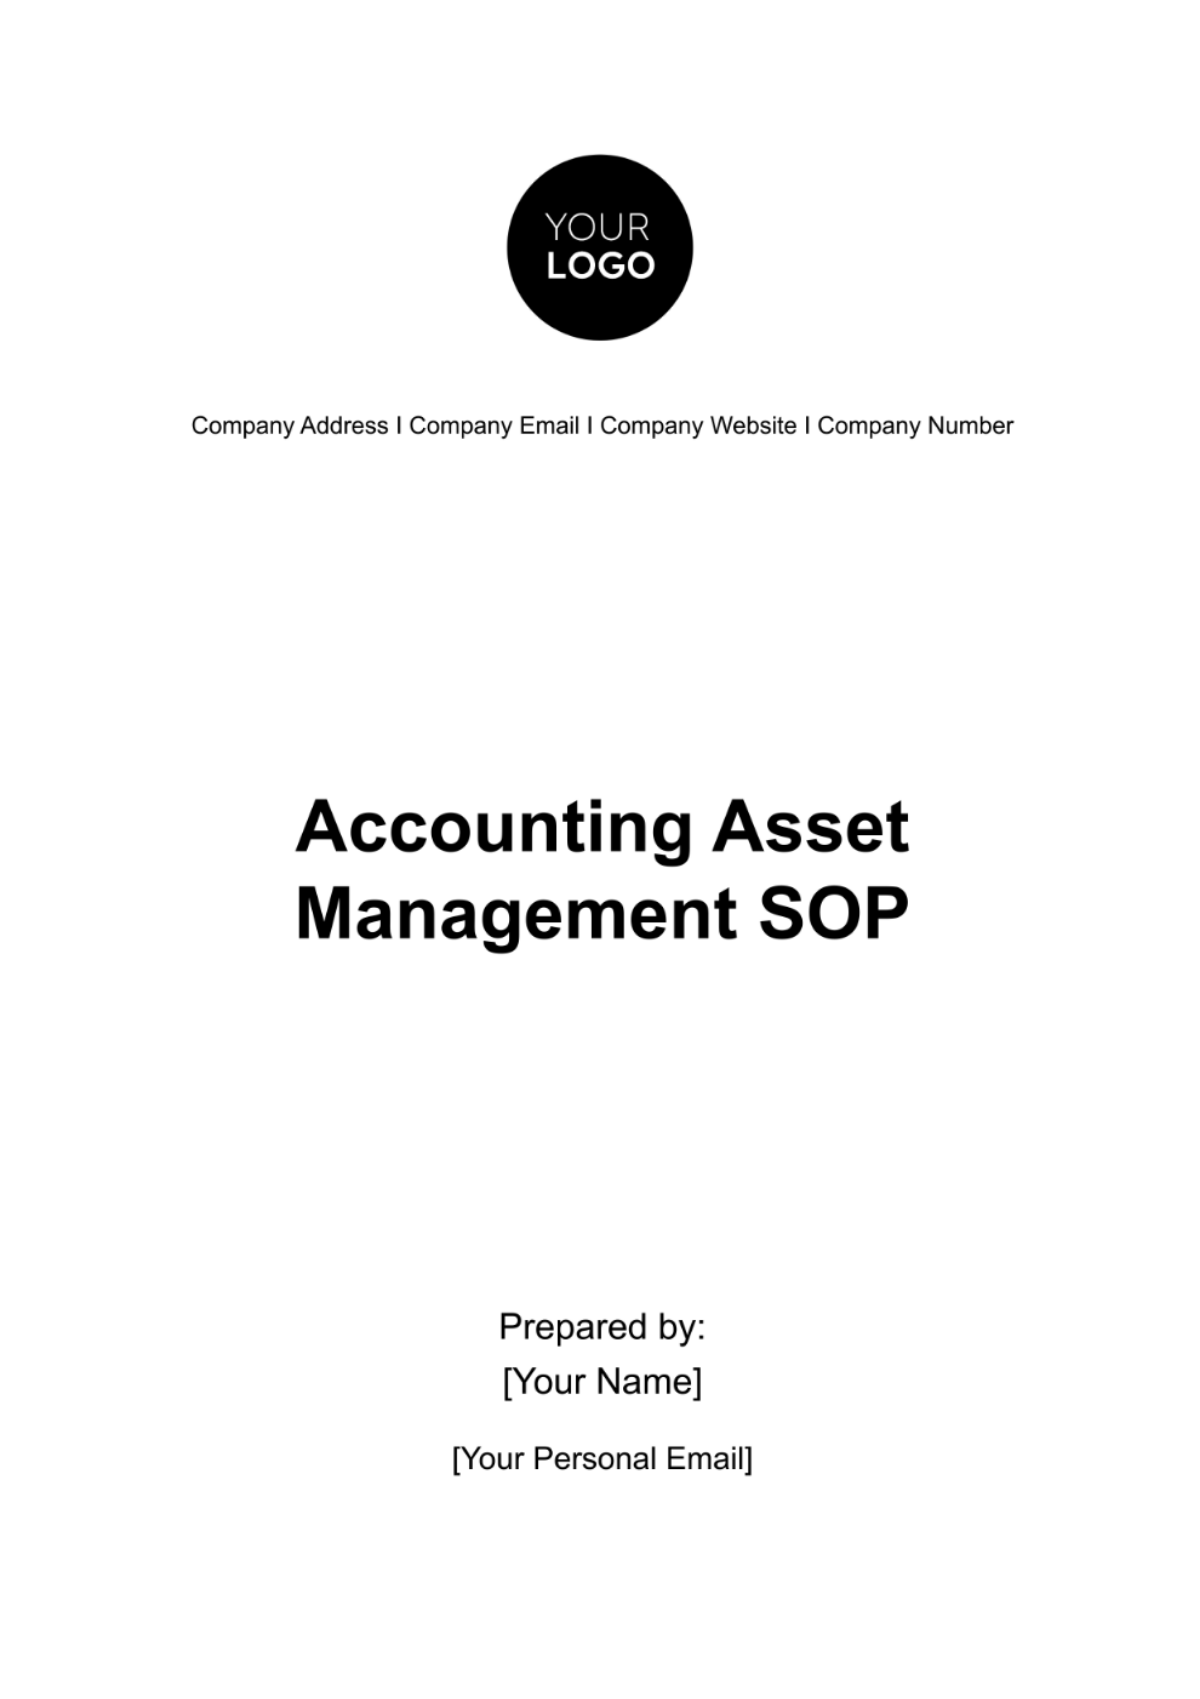 Free Accounting Asset Management SOP Template